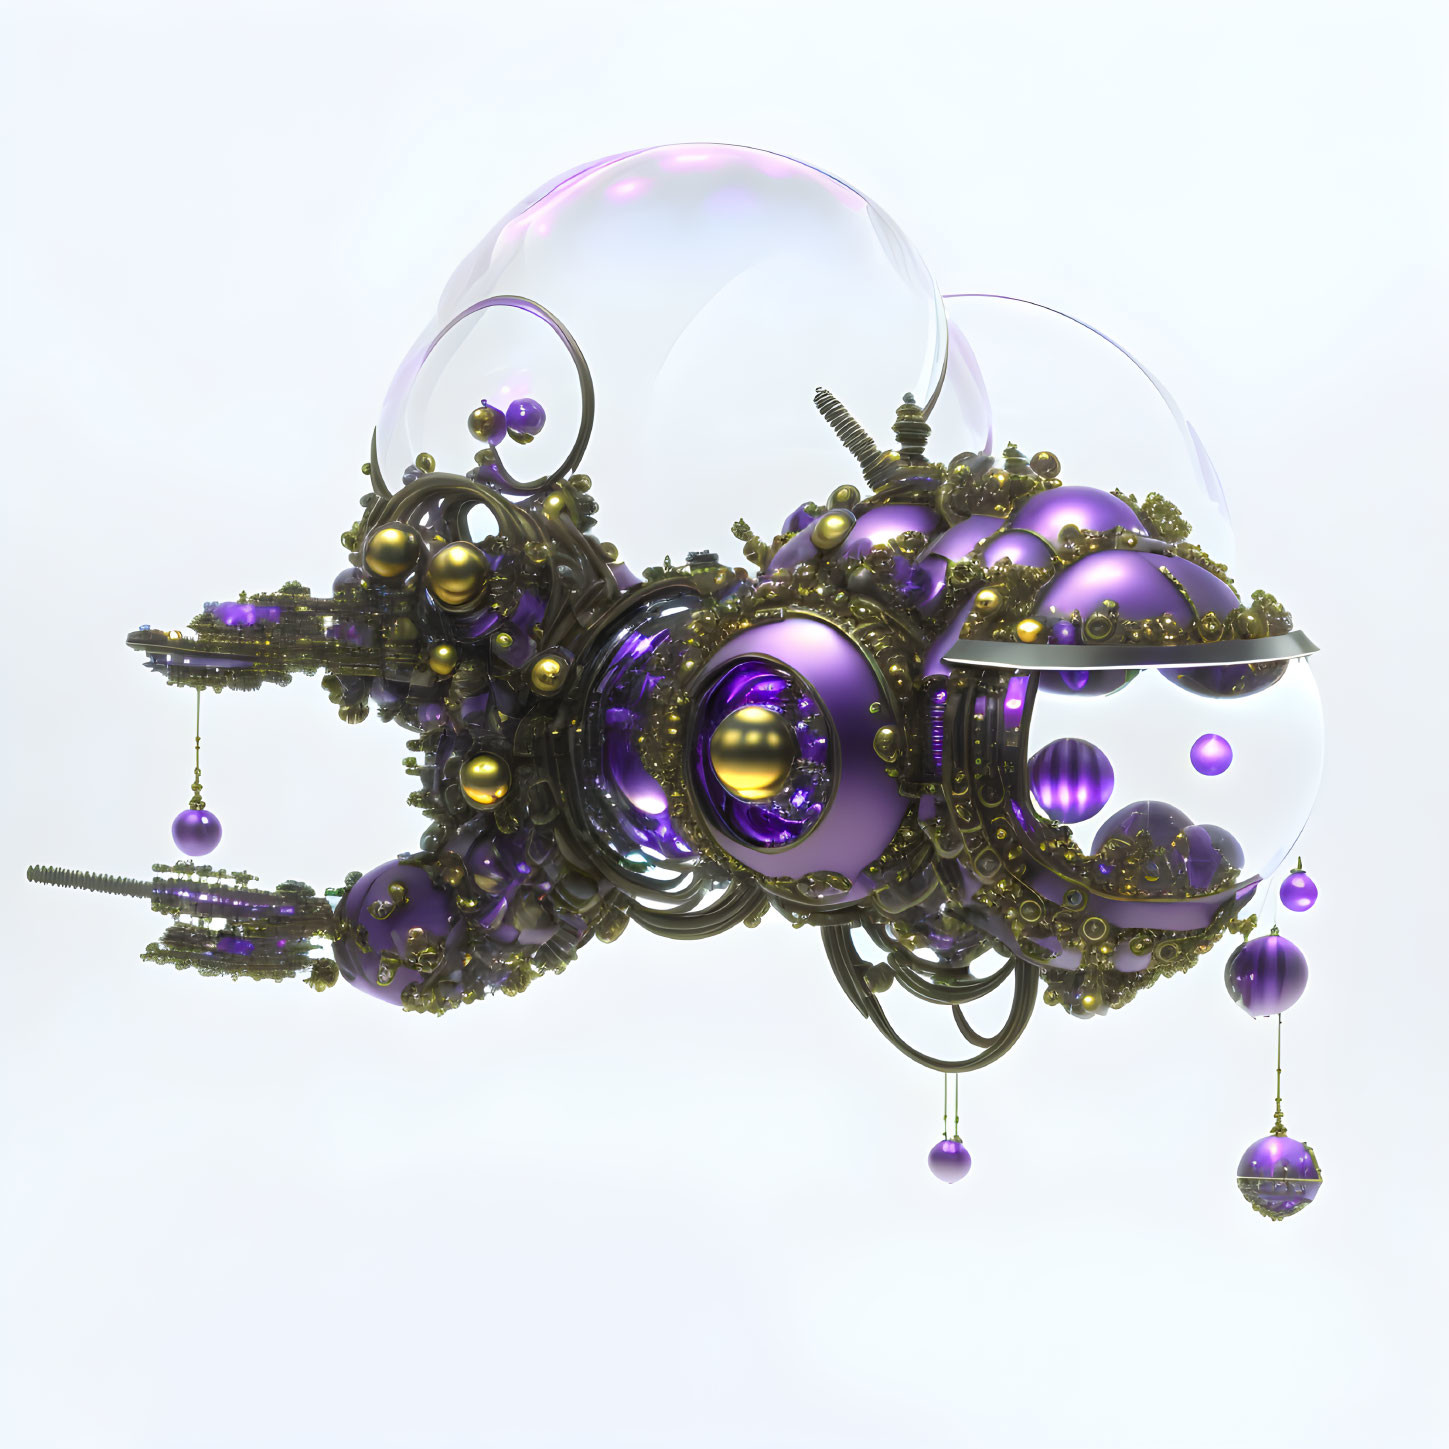 Complex Steampunk-Inspired 3D Render with Transparent Bubbles